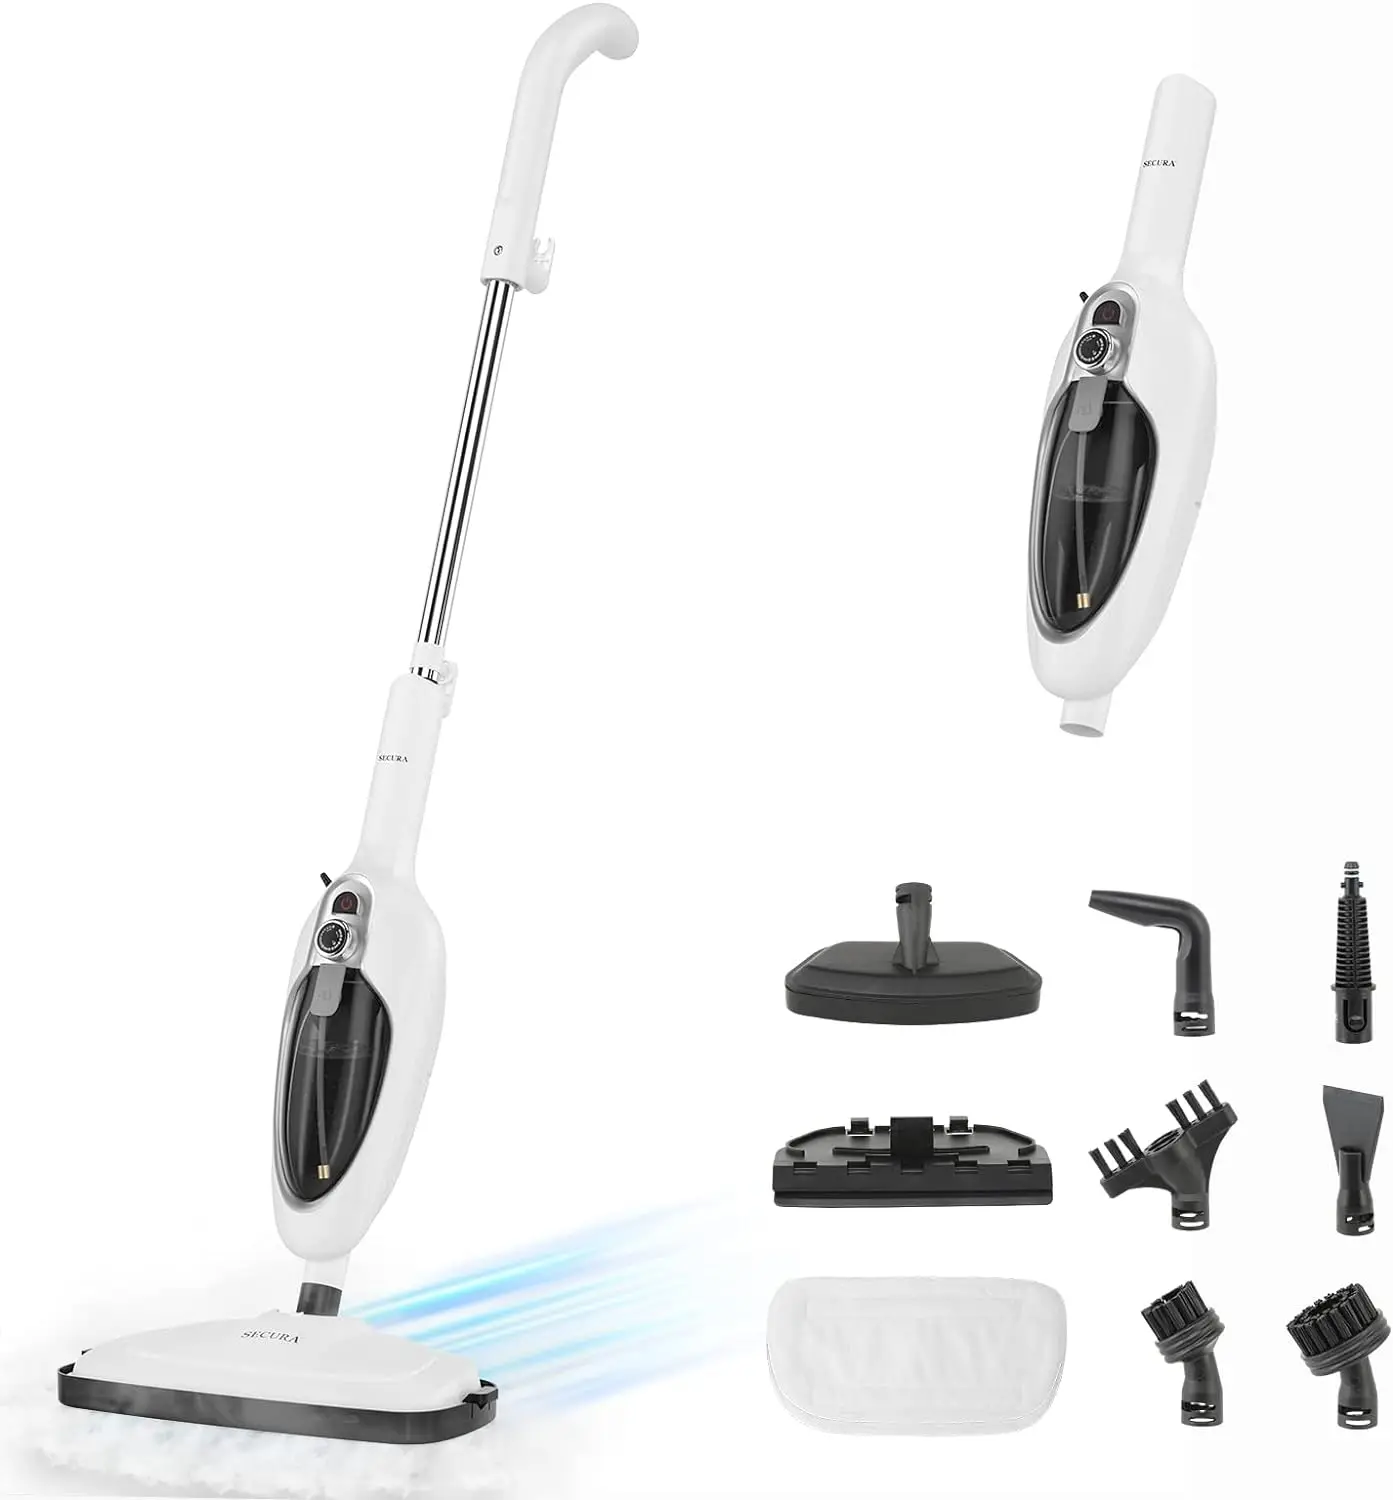 

Steam Mop 10-in-1Convenient Detachable Steam Cleaner,Multifunctional Cleaning Machine Floor Steamer with 3 Microfiber Mop Pads